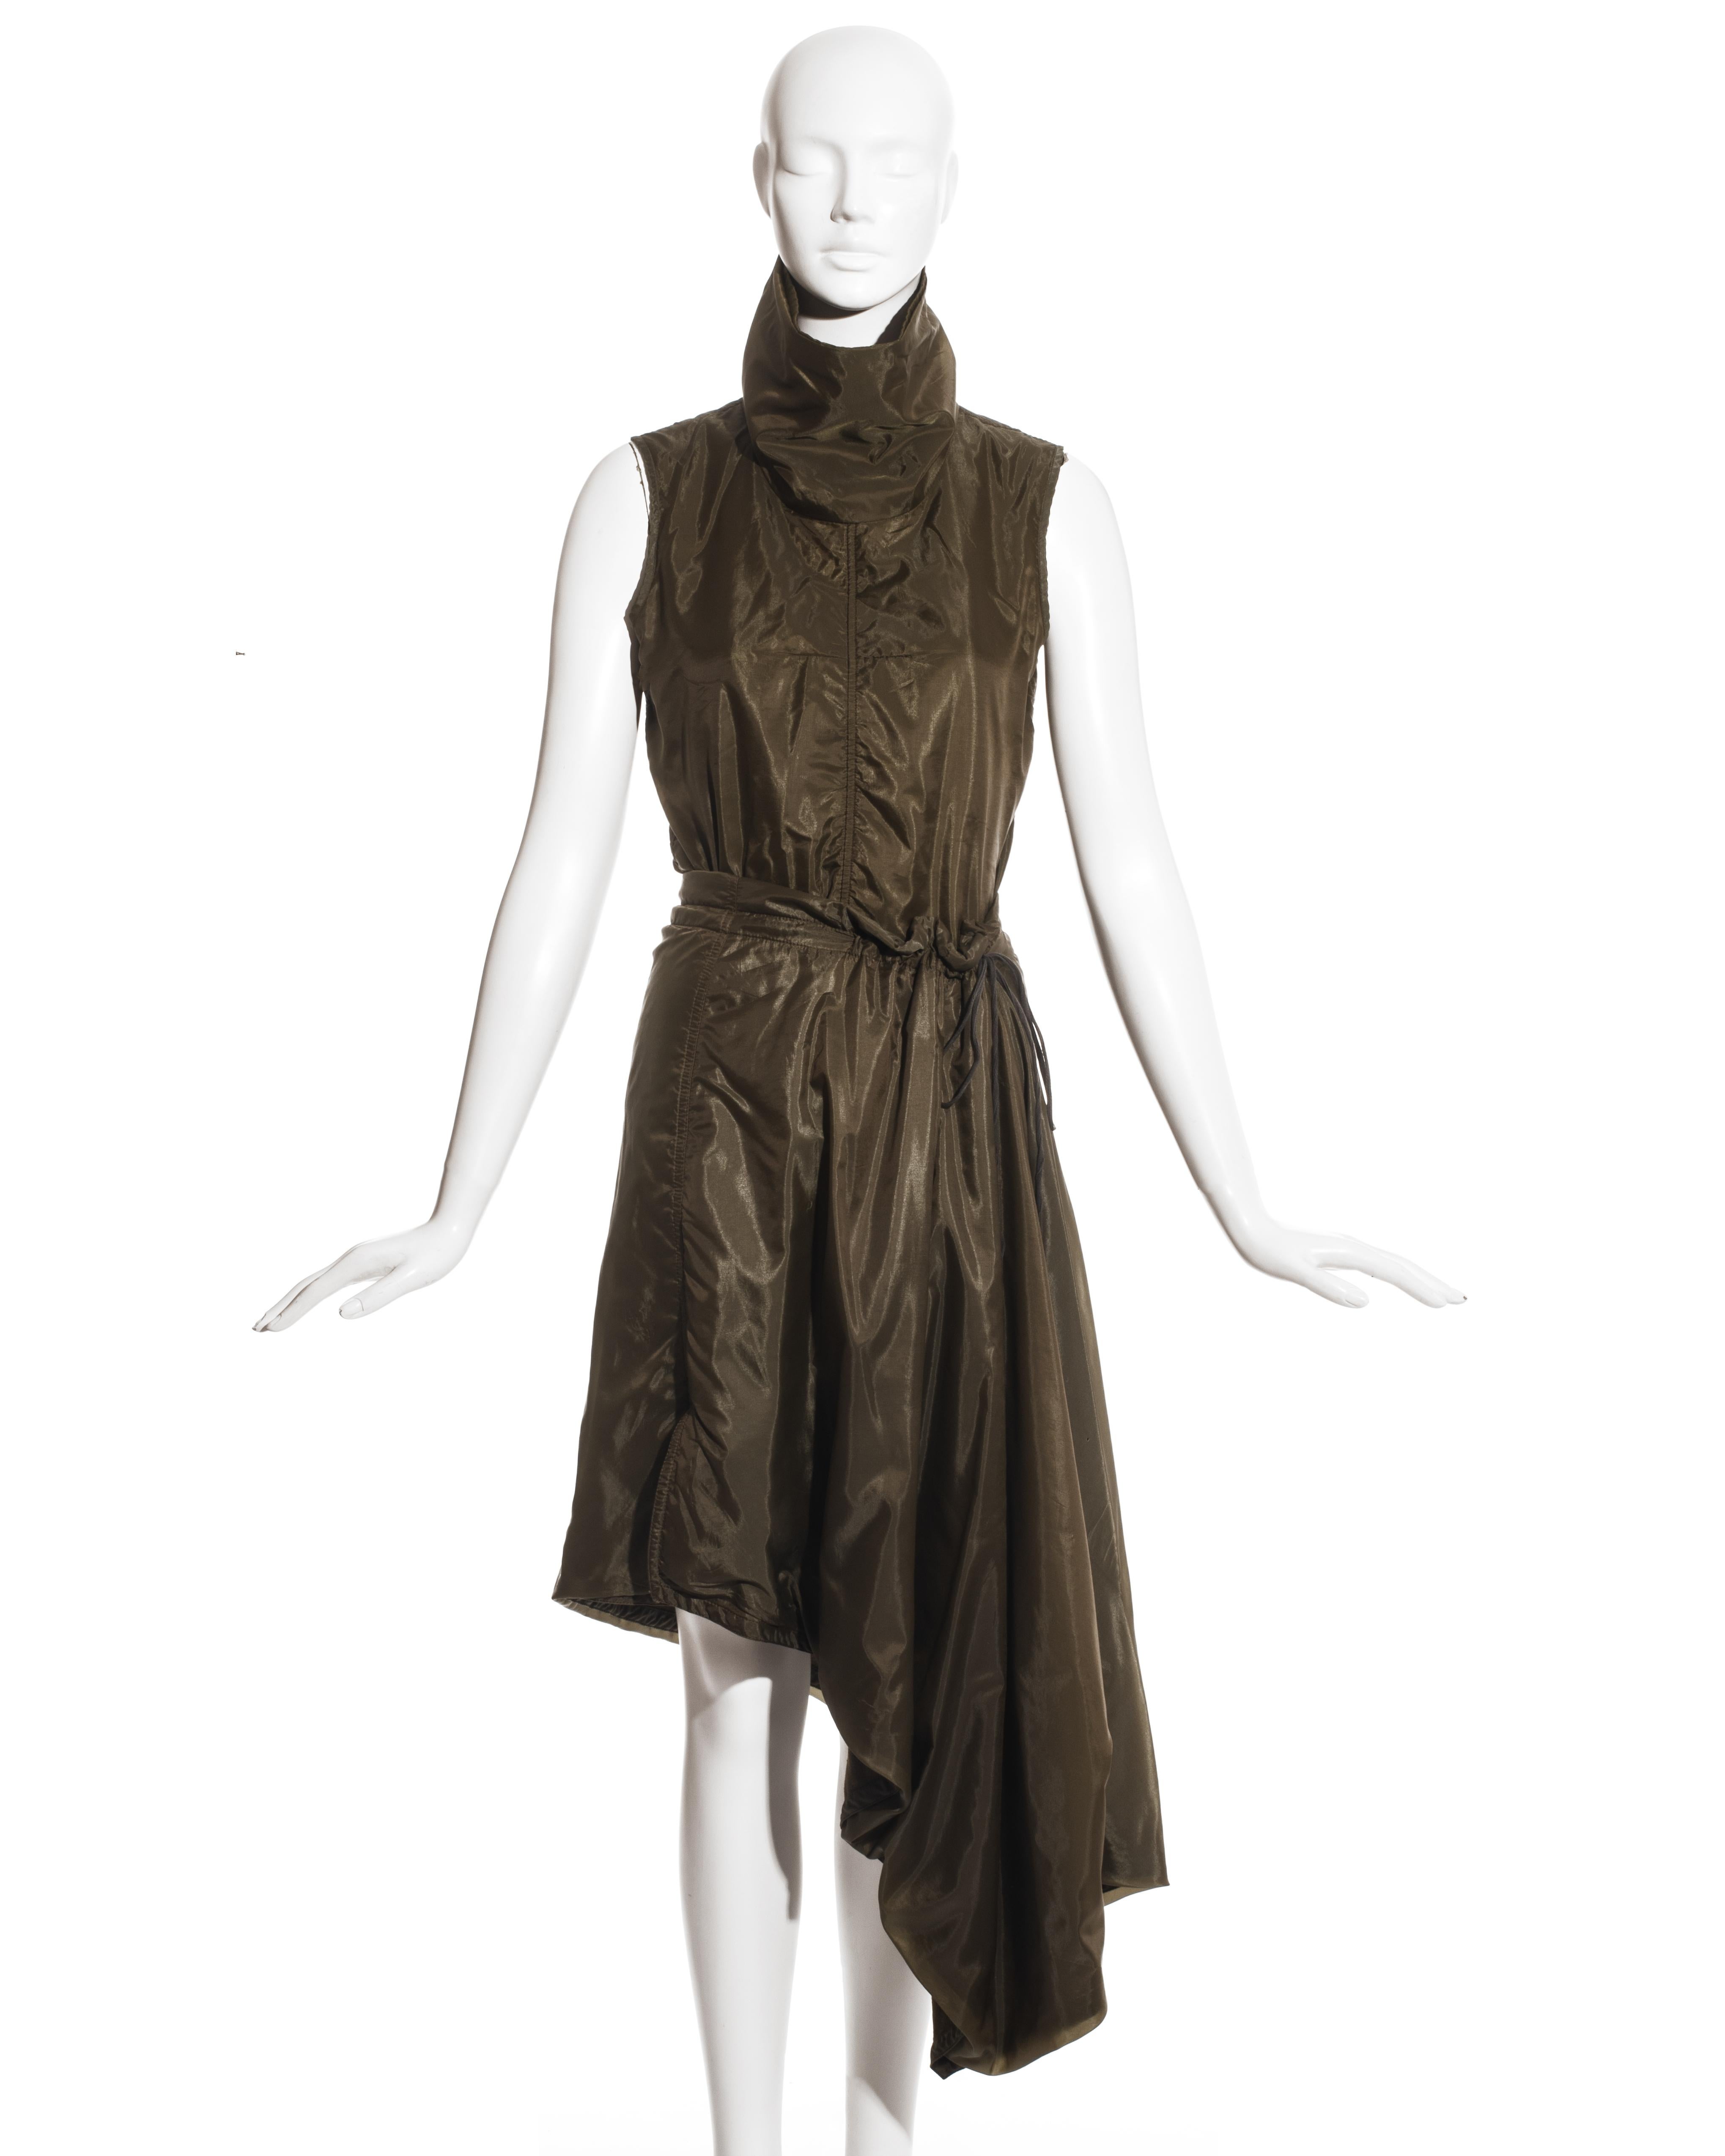 Ann Demeulemeester green nylon backed in cotton jersey skirt suit comprising: vest with high turtleneck collar and two-way zipper at back, drawstring mid-length skirt with asymmetric hanging drape and small leg slit. 

Fall-Winter 2000